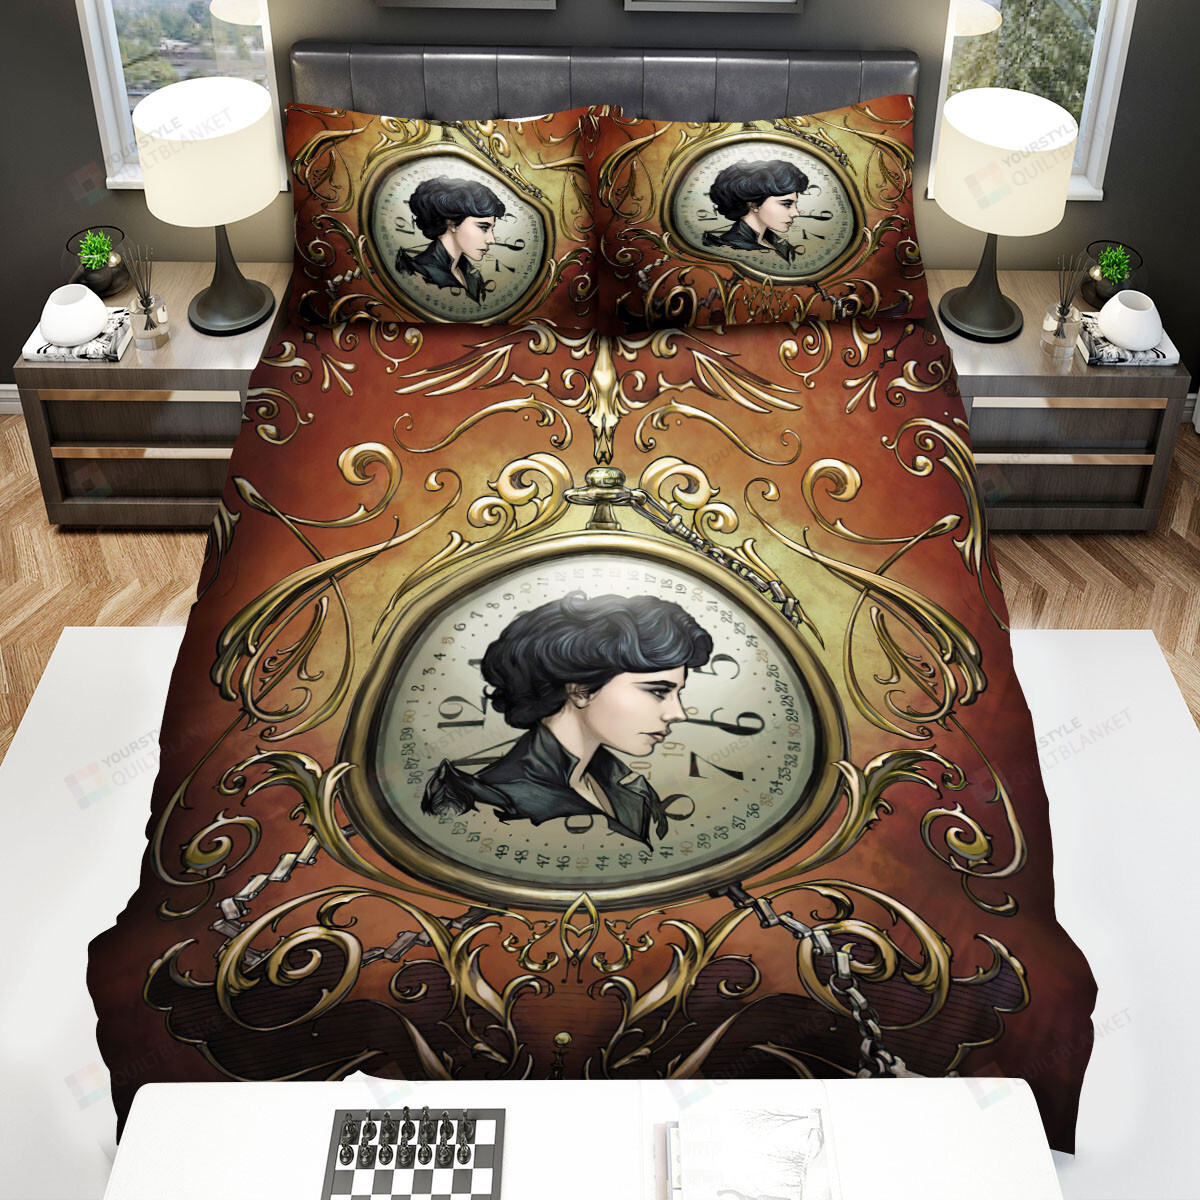 Miss Peregrine's Home For Peculiar Children (2016) Movie Poster Artwork 2 Bed Sheets Spread Comforter Duvet Cover Bedding Sets